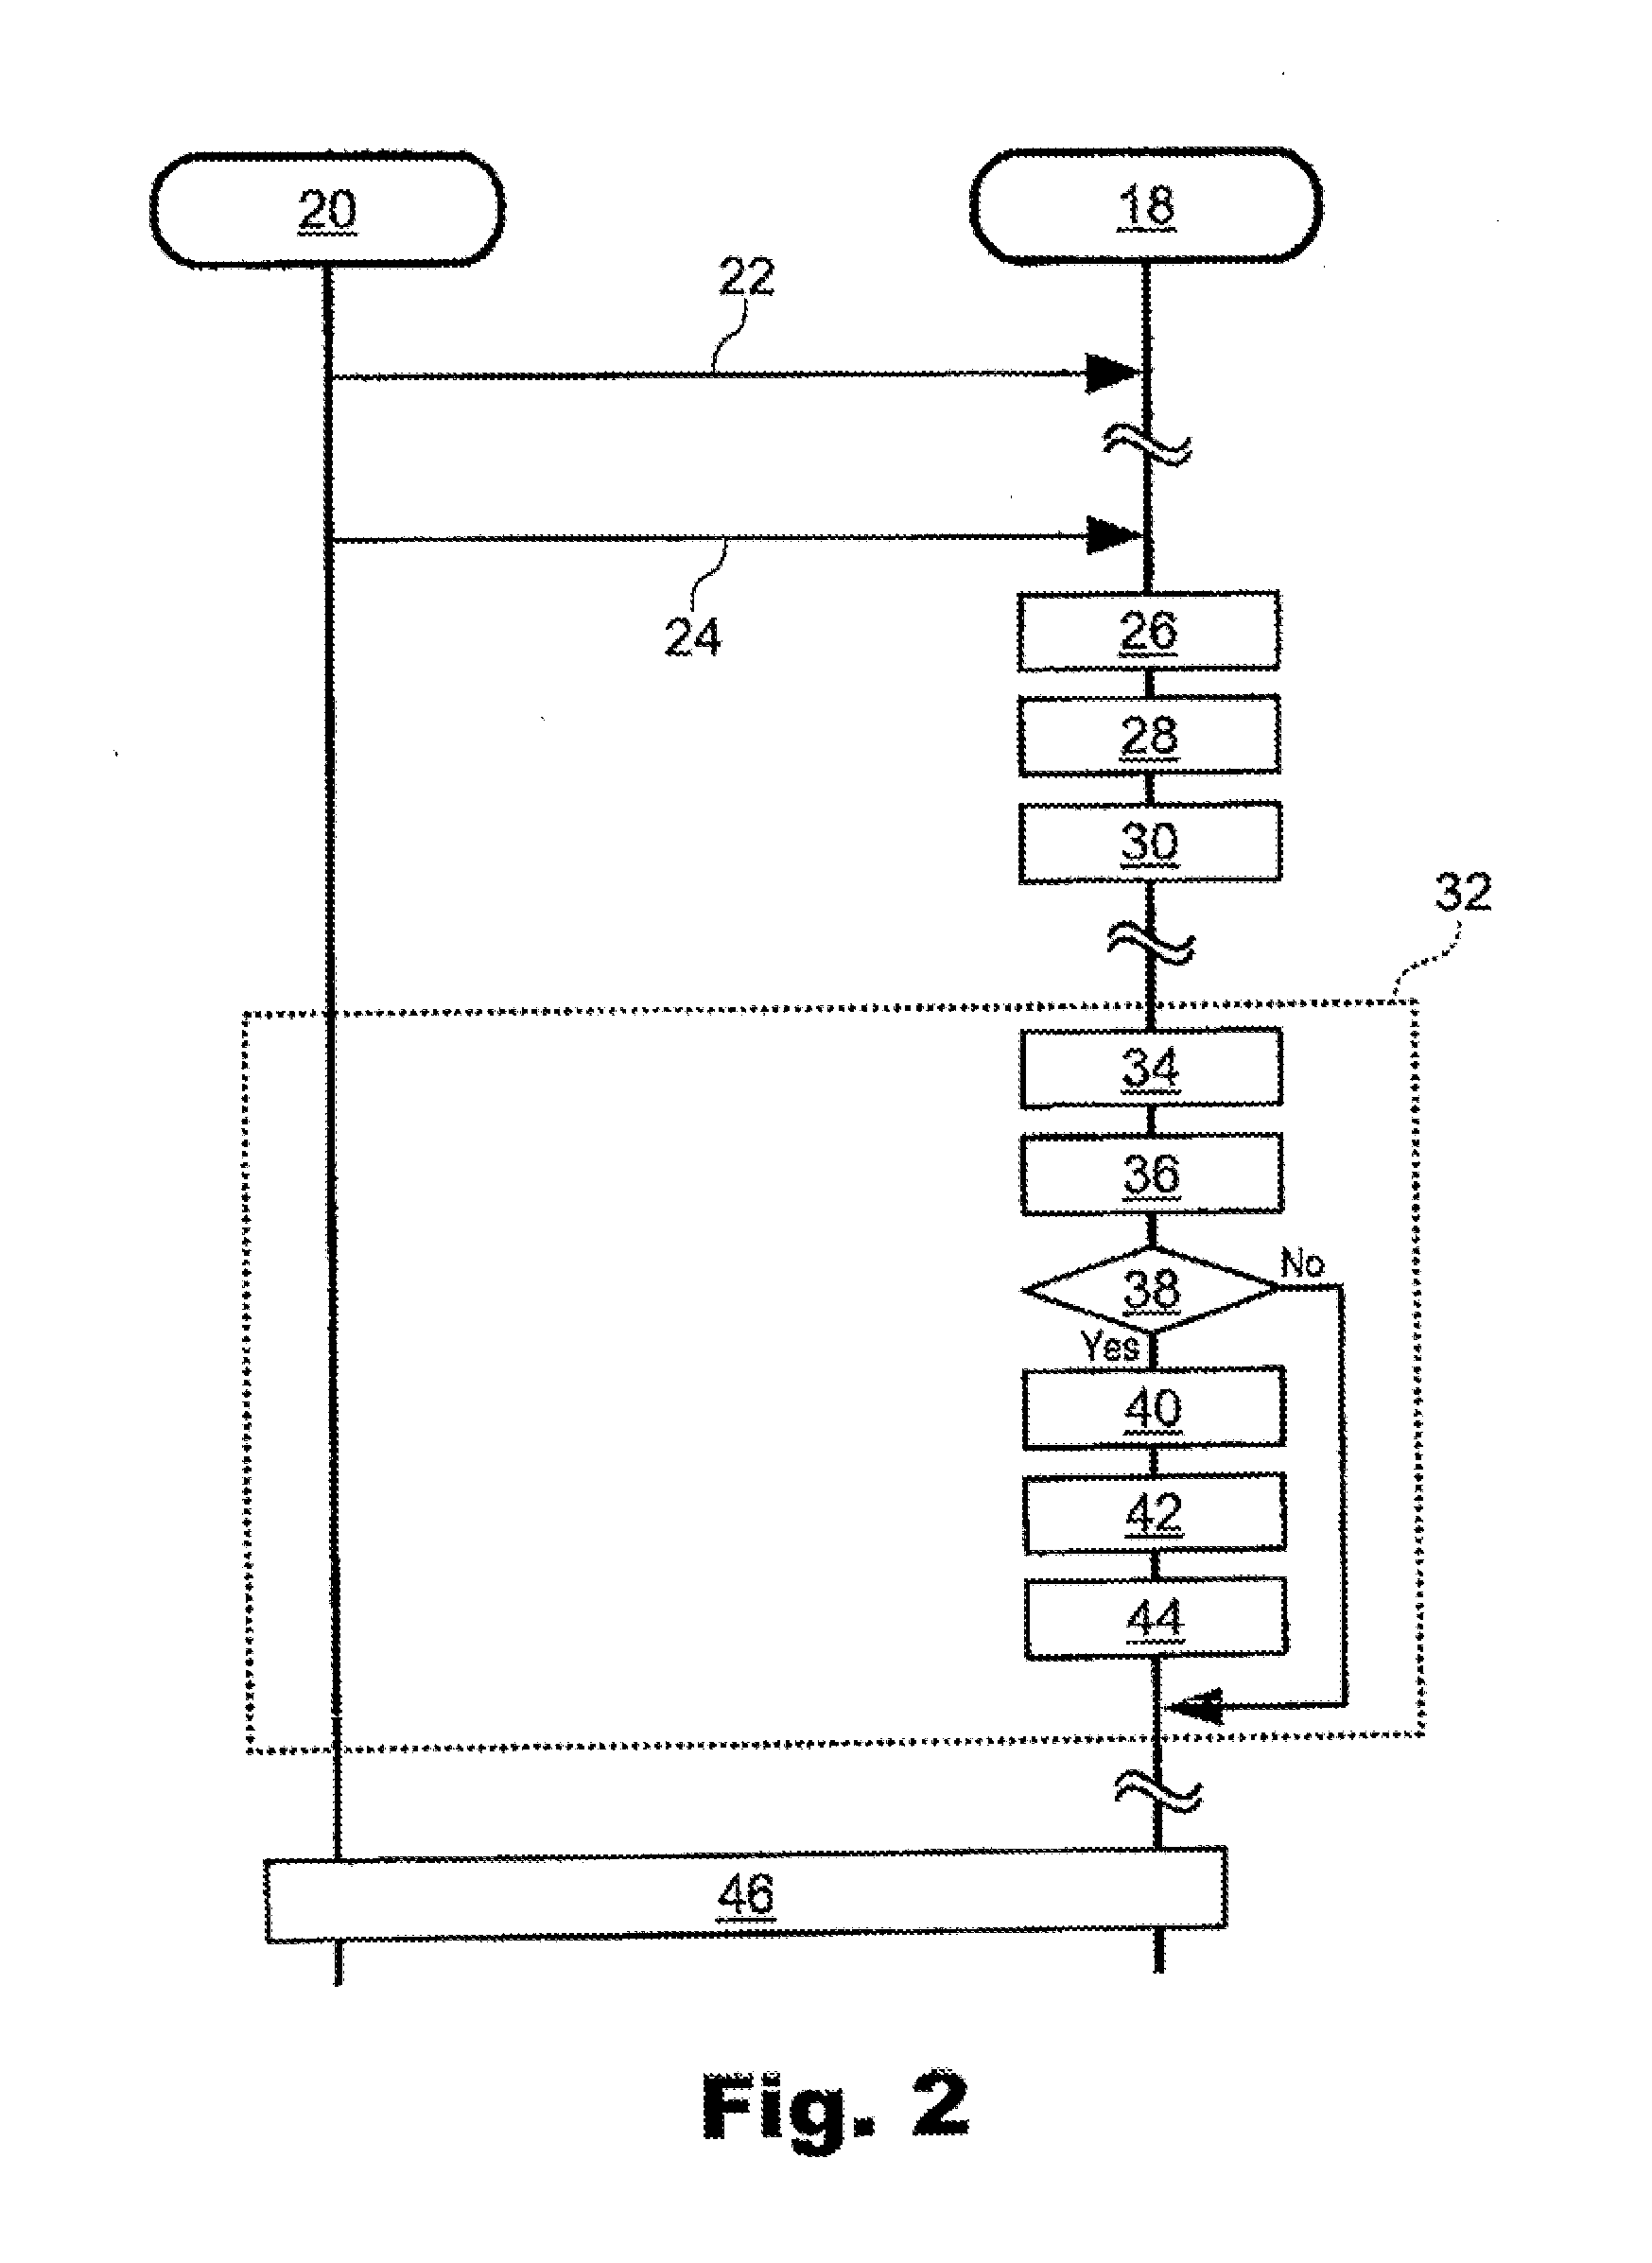 Mobile radio communications device and related method of operation